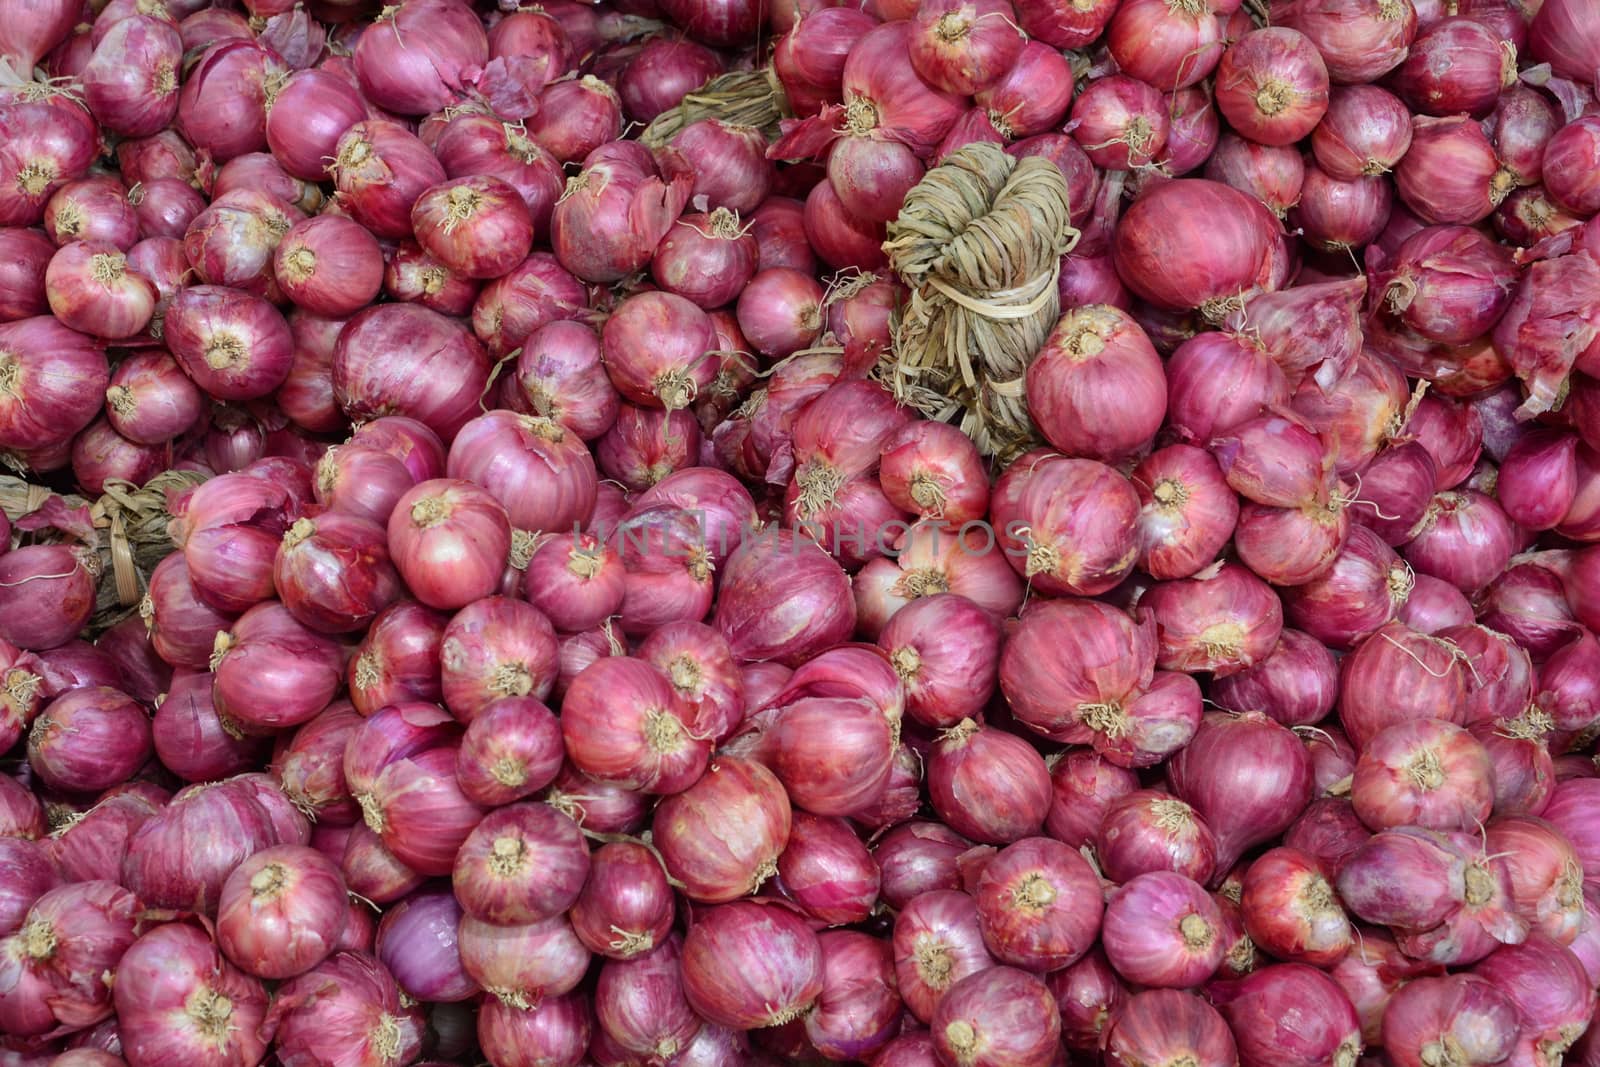 The shallot is a type of onion, specifically a botanical variety of the species Allium cepa